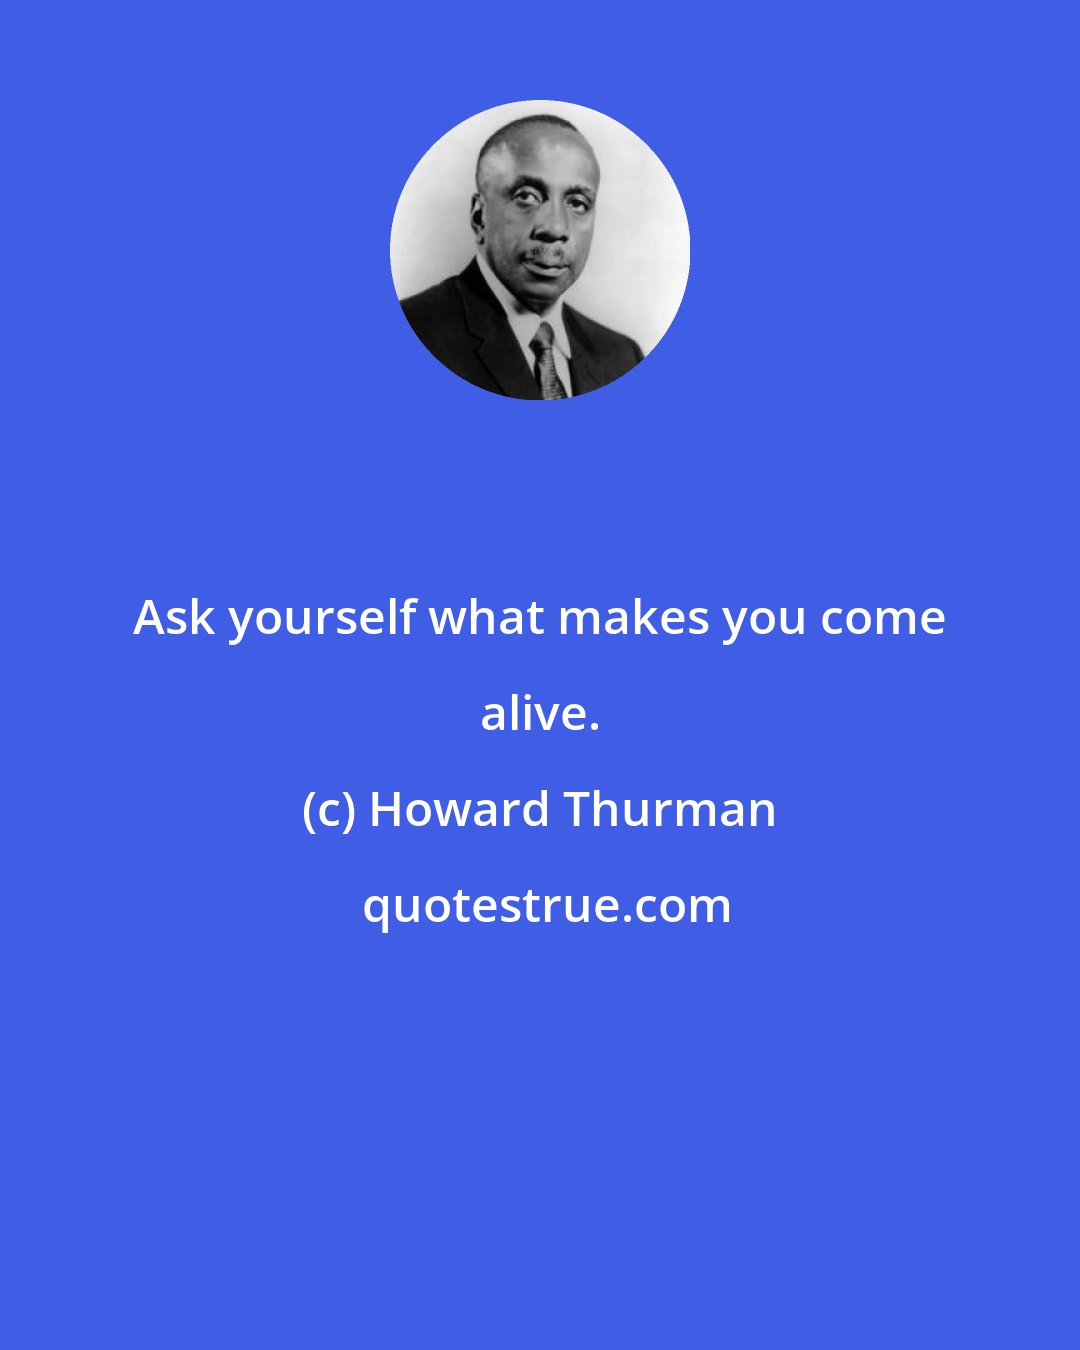 Howard Thurman: Ask yourself what makes you come alive.